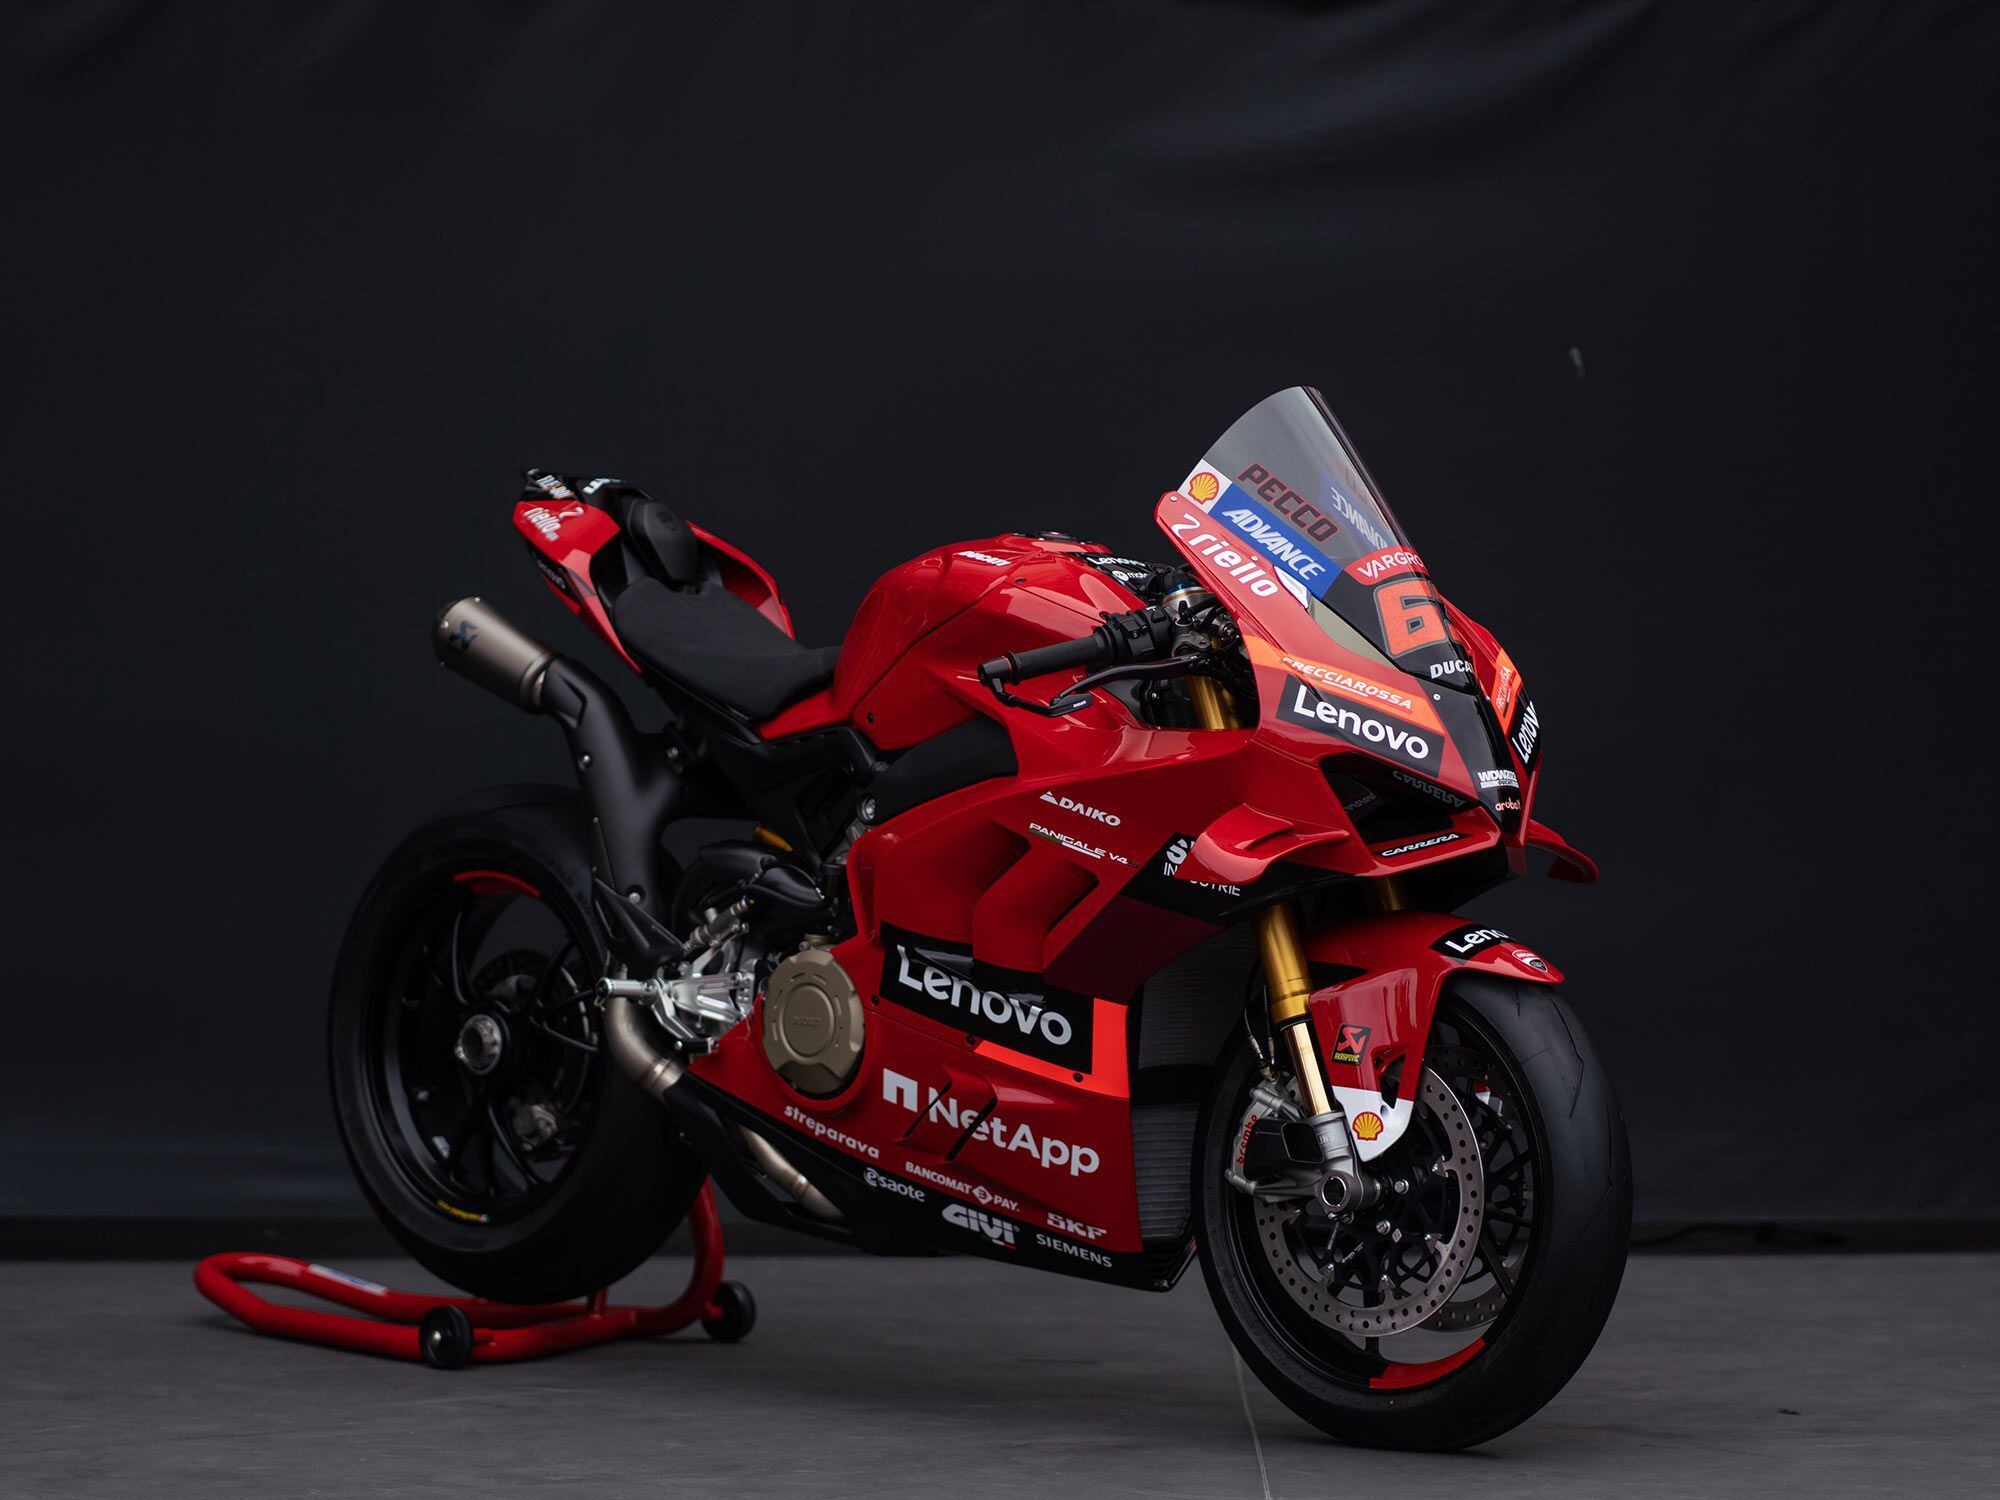 The 2022 Ducati Panigale V4 S dating unique livery for WDW2022.